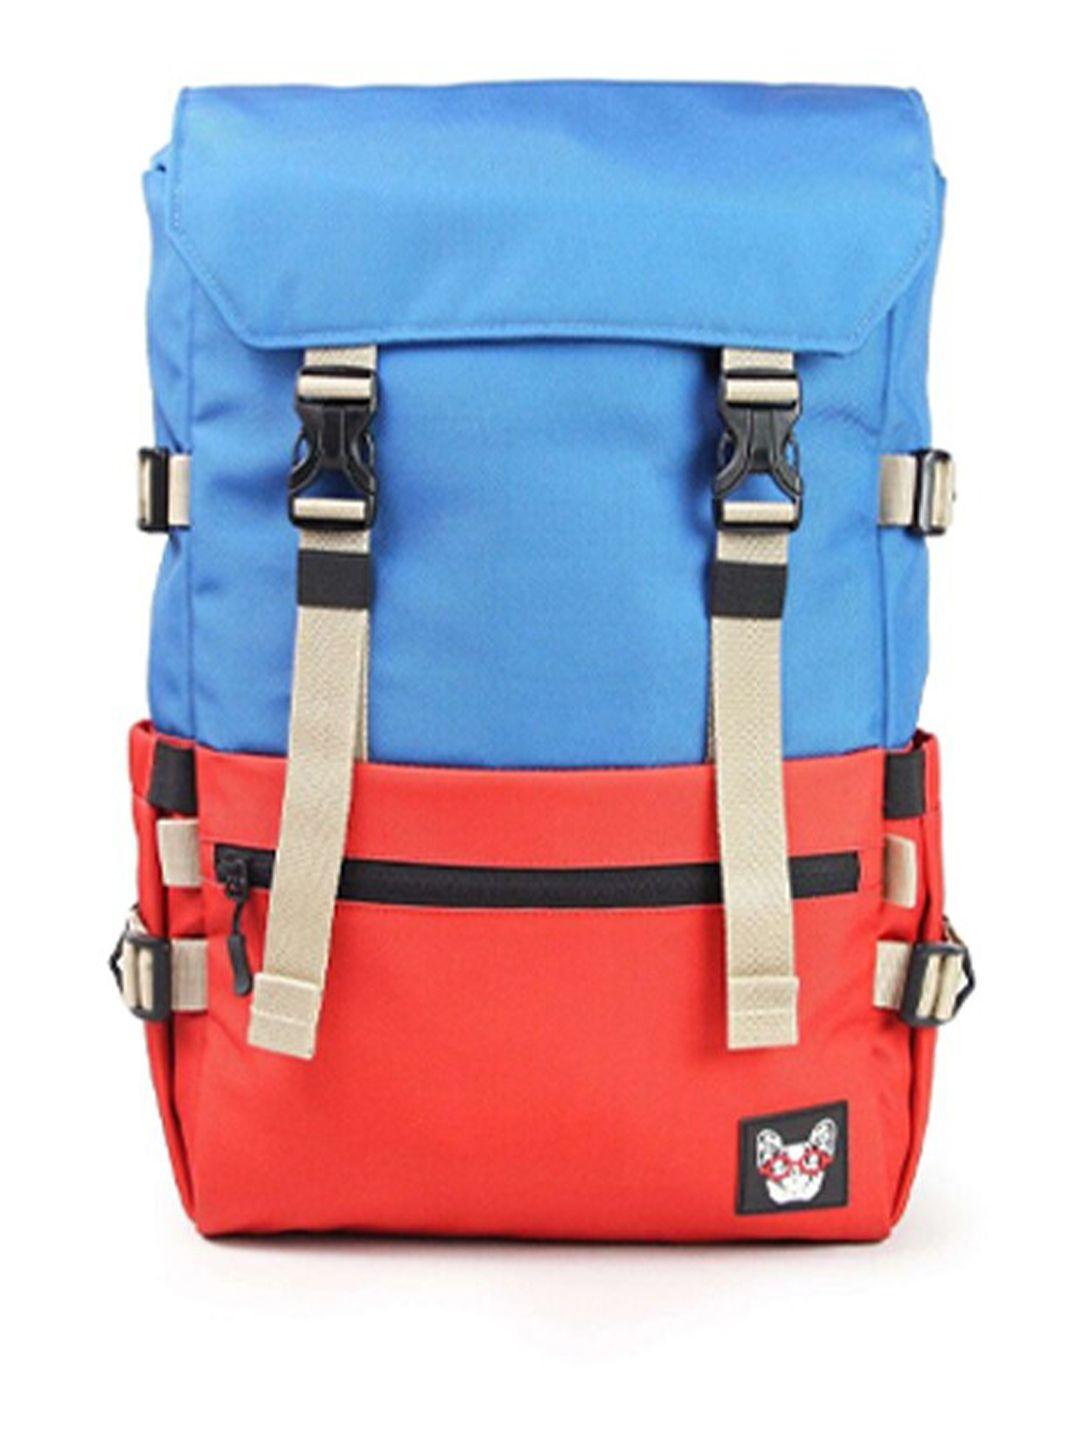 madbrag unisex blue & red colourblocked backpack with compression straps